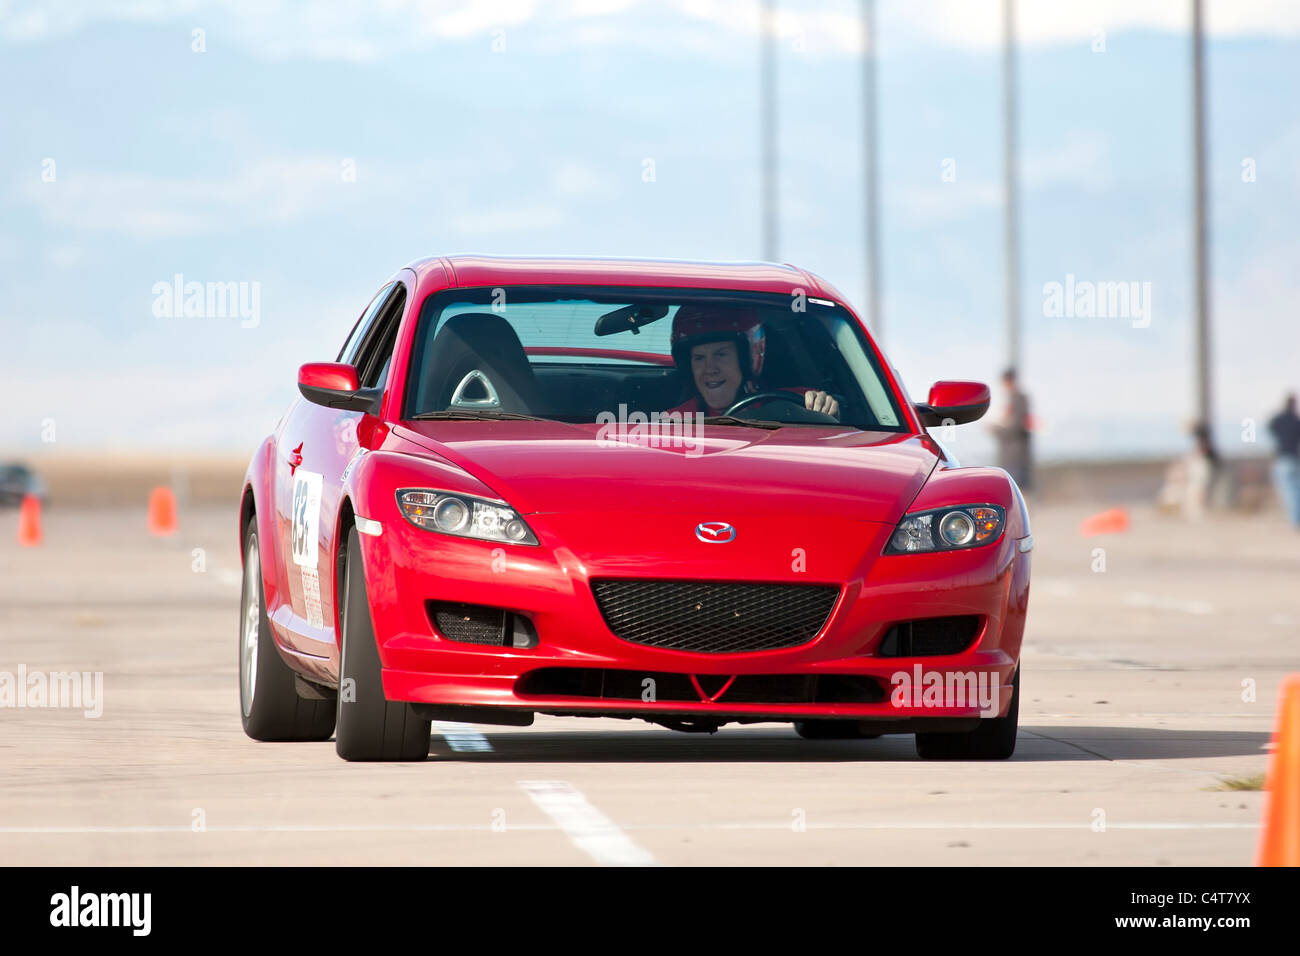 Denver, CO - A 2004 Red Mazda RX-8 in an autocross race at a regional Sports Car Club of America (SCCA) event. Stock Photo